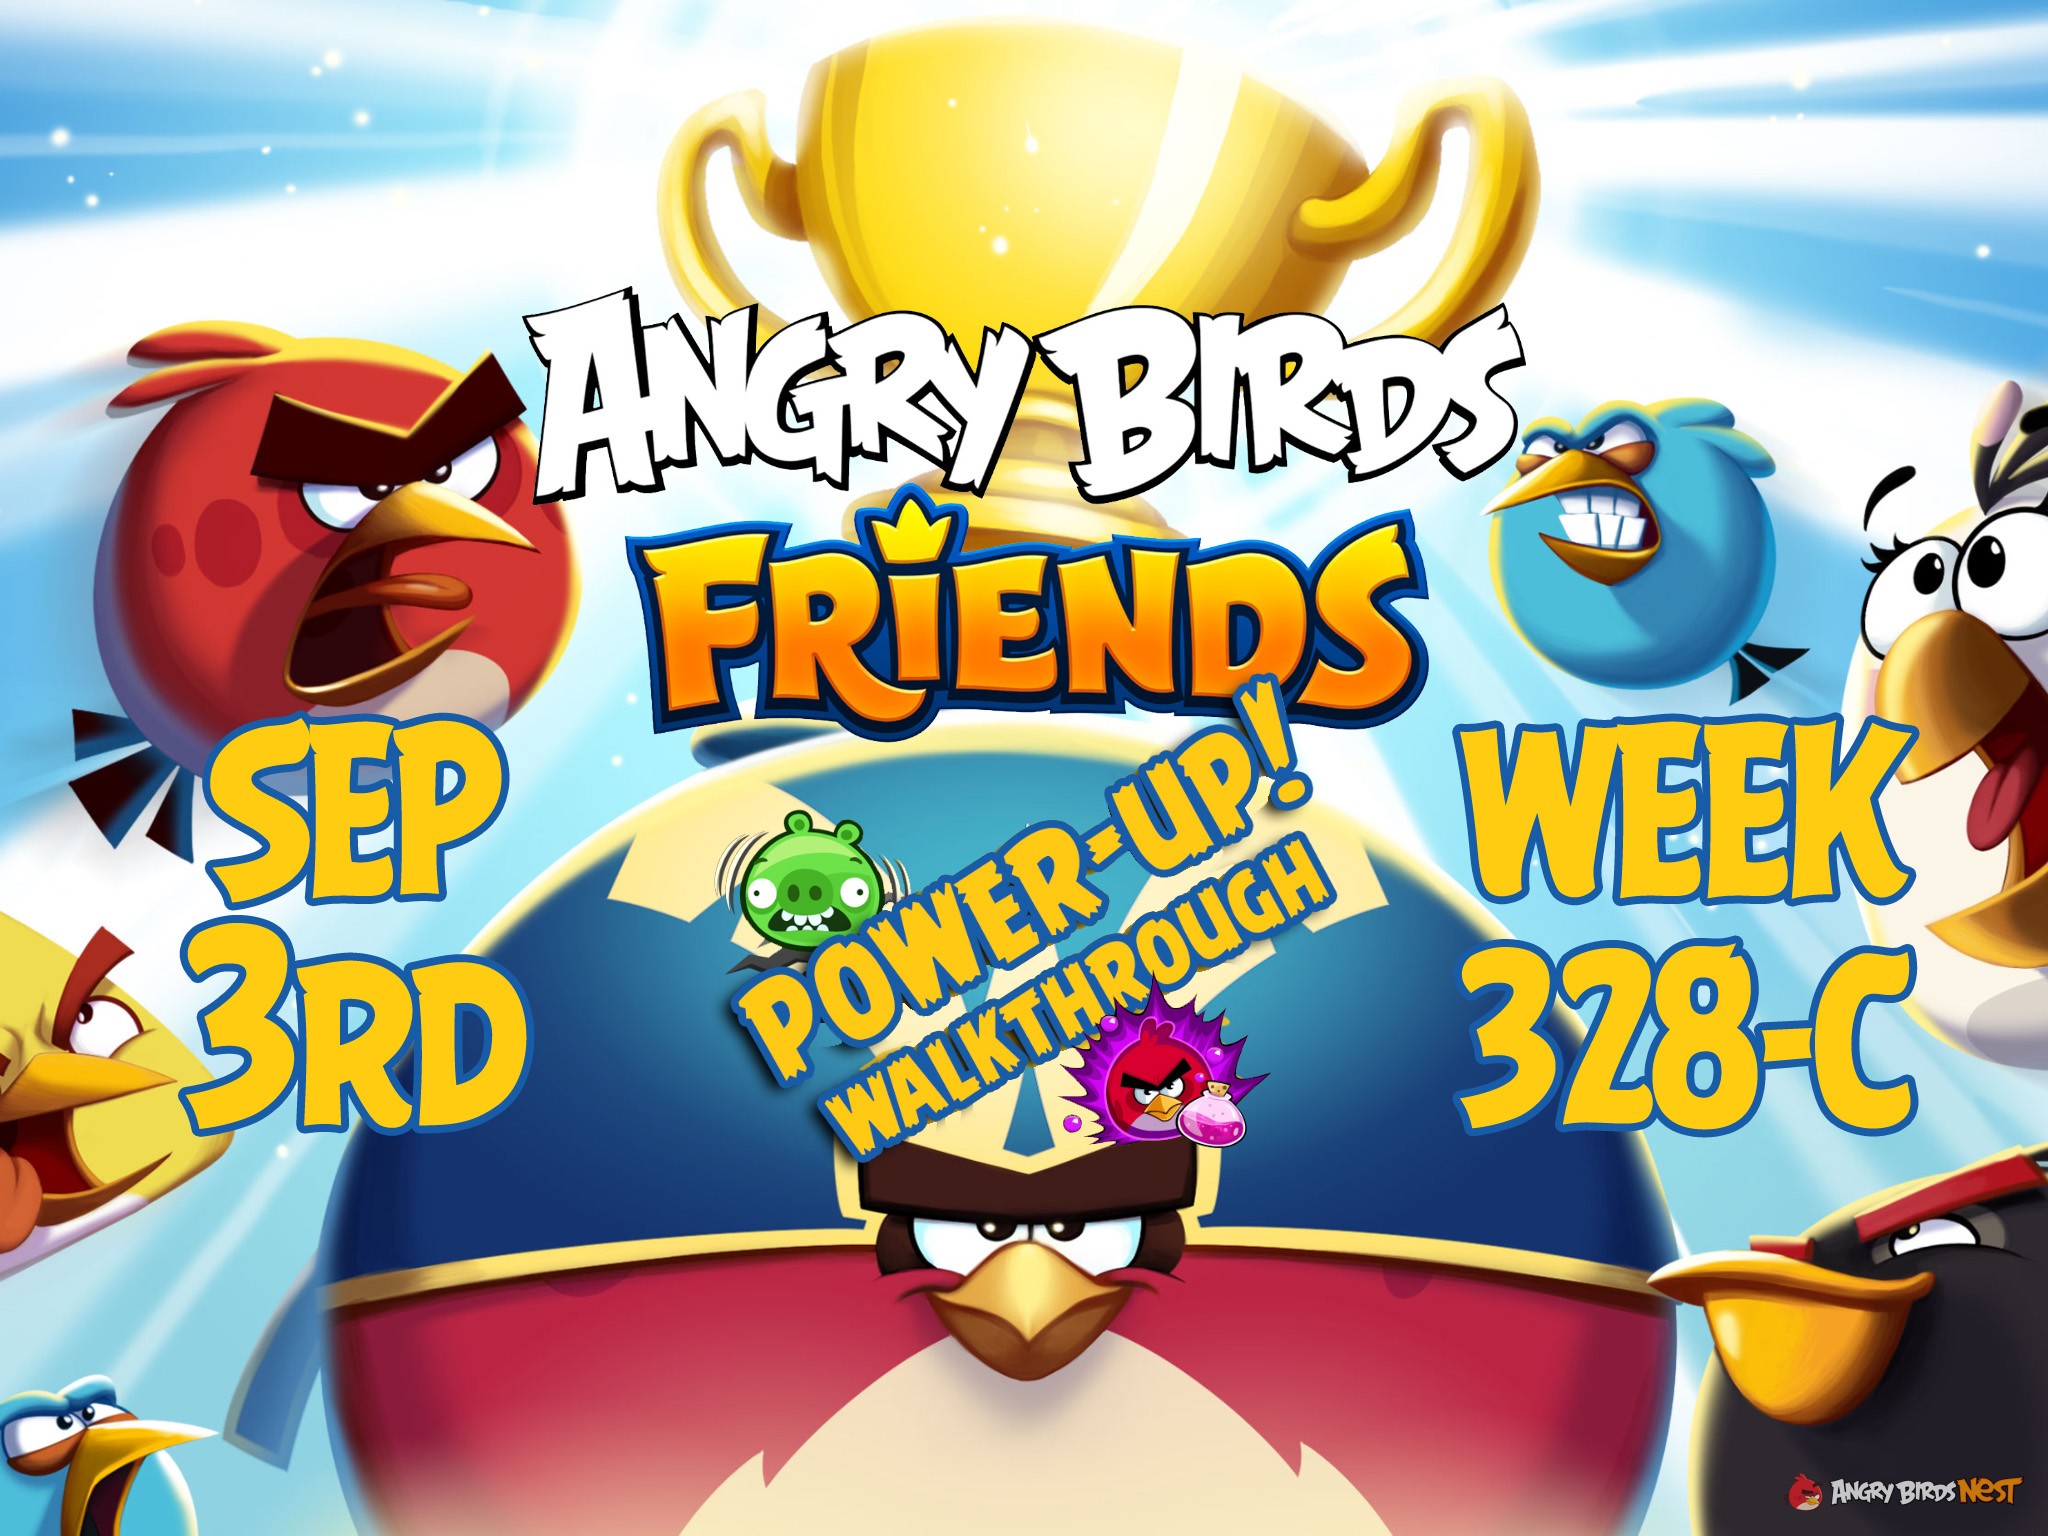 Angry-Birds-Friends-Tournament-Week-328-C-Feature-Image-PU